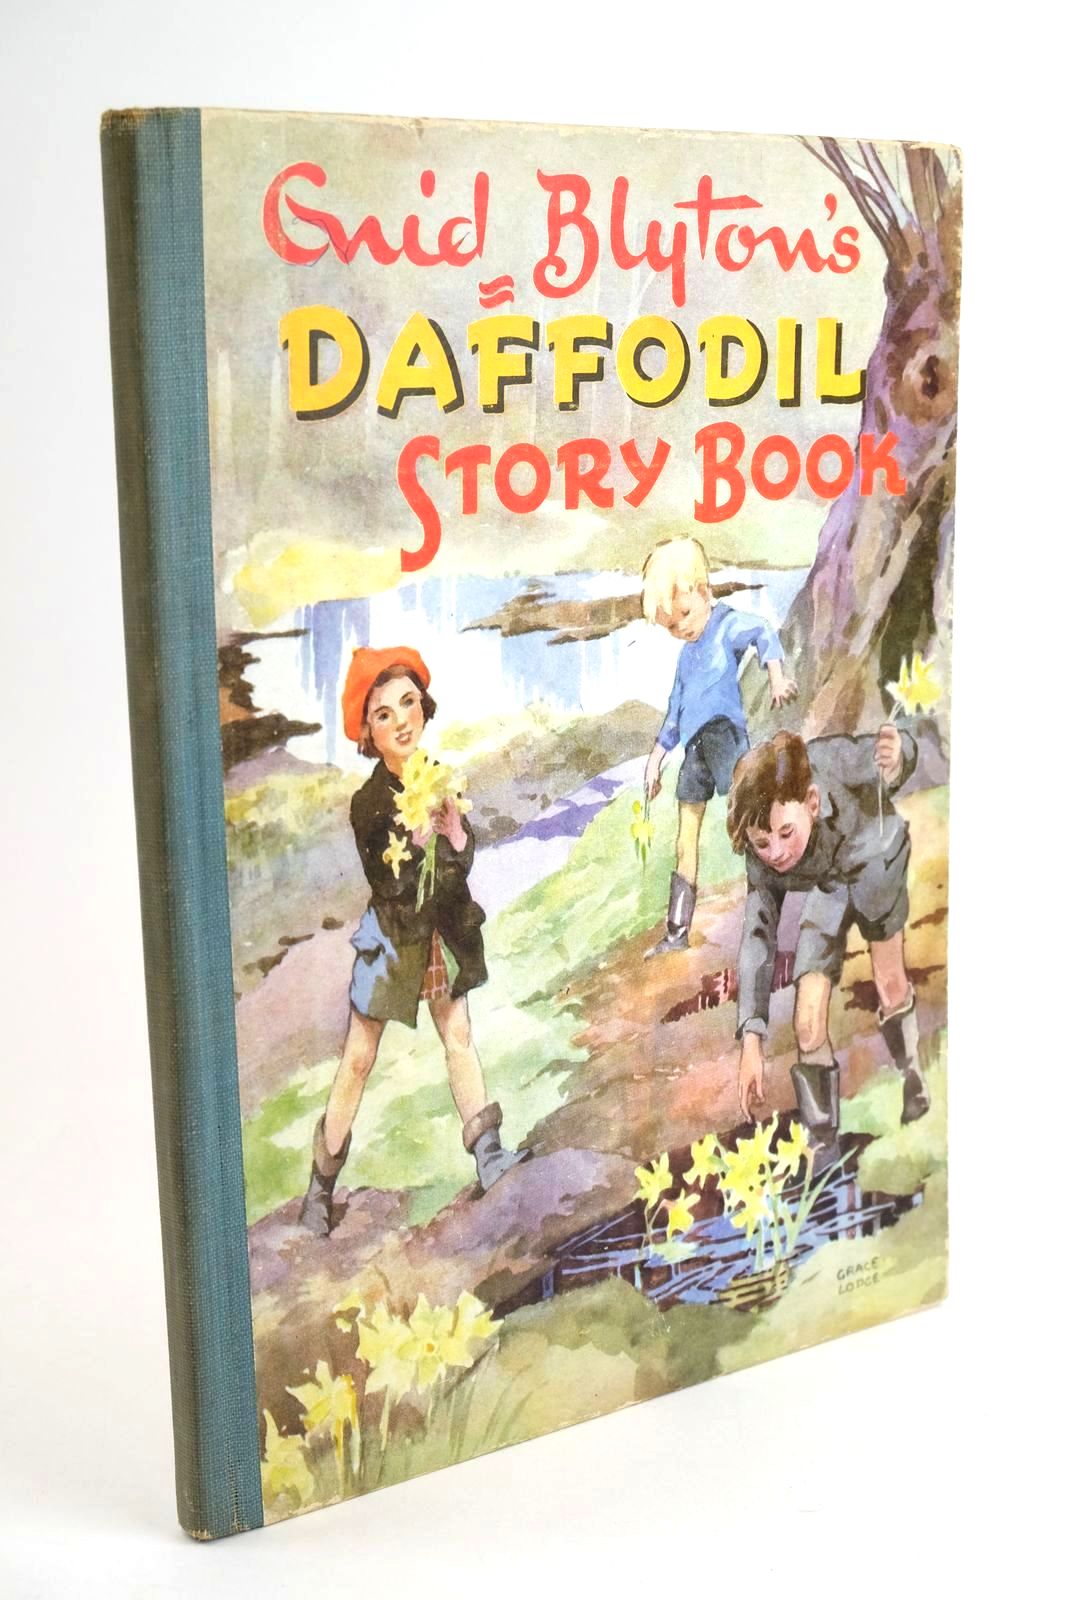 Photo of ENID BLYTON'S DAFFODIL STORY BOOK written by Blyton, Enid published by Latimer House Limited (STOCK CODE: 1323420)  for sale by Stella & Rose's Books